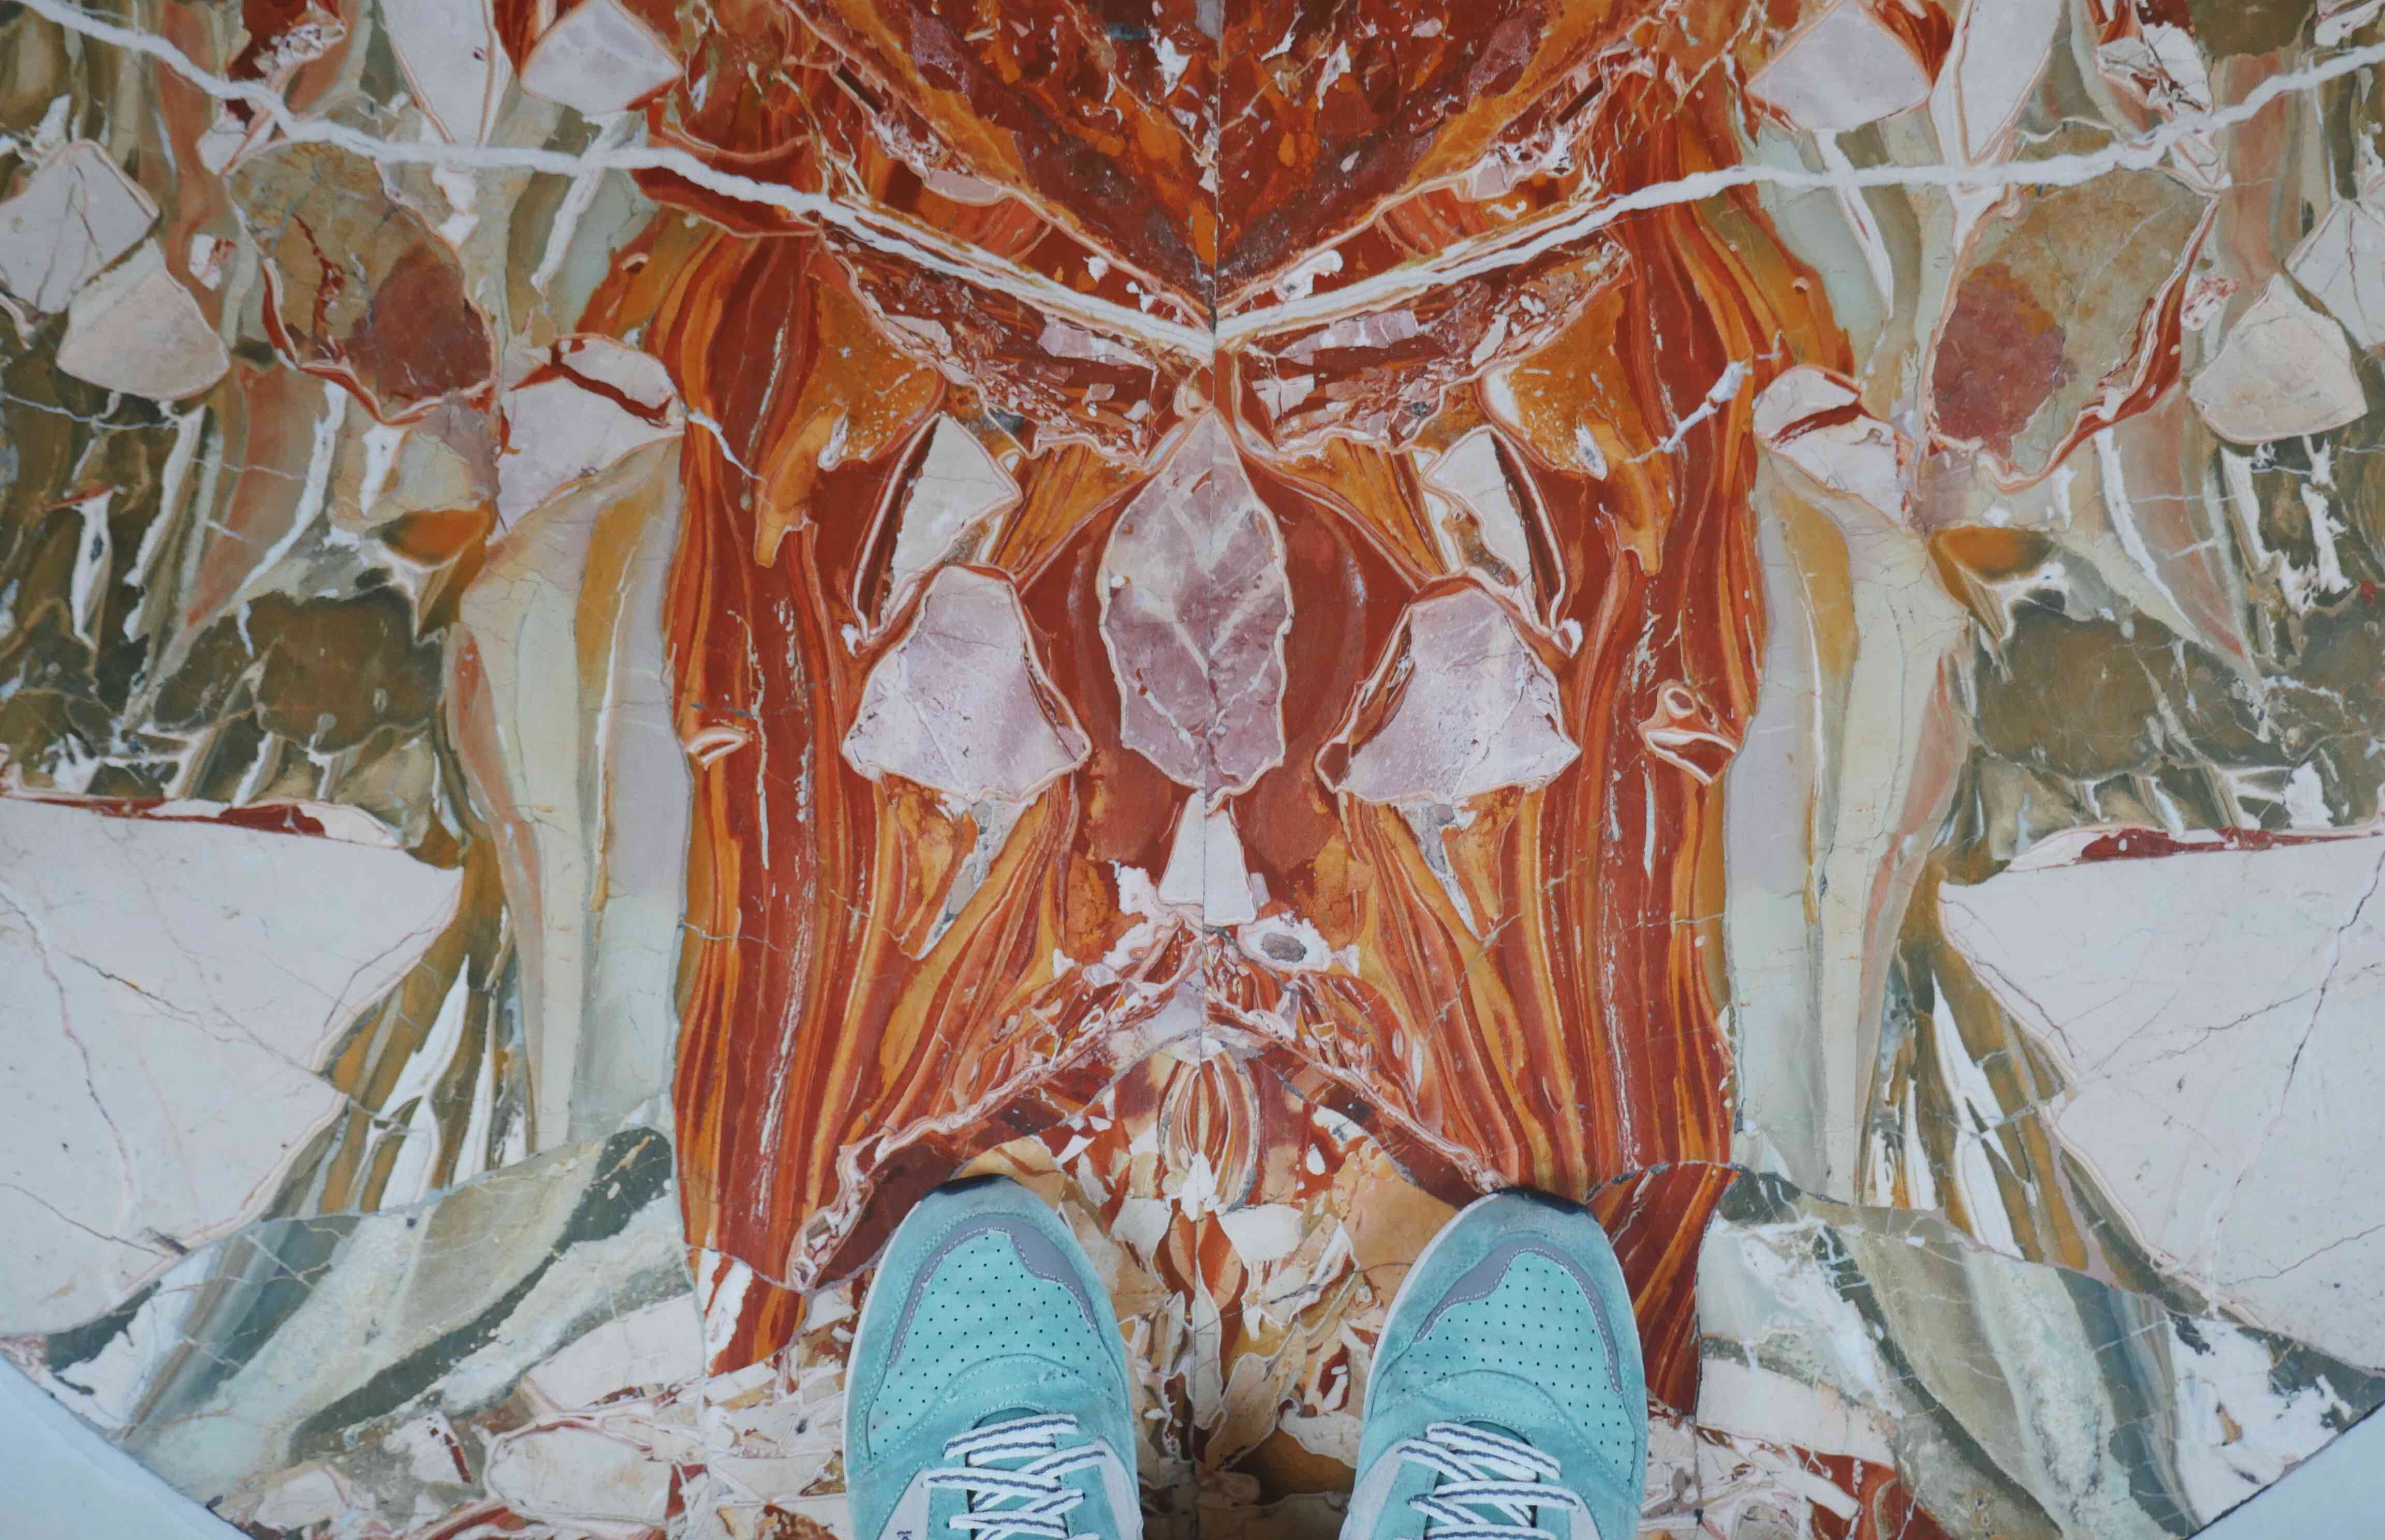 Turquoise shoes on a striated white, grey, and coral stone floor.